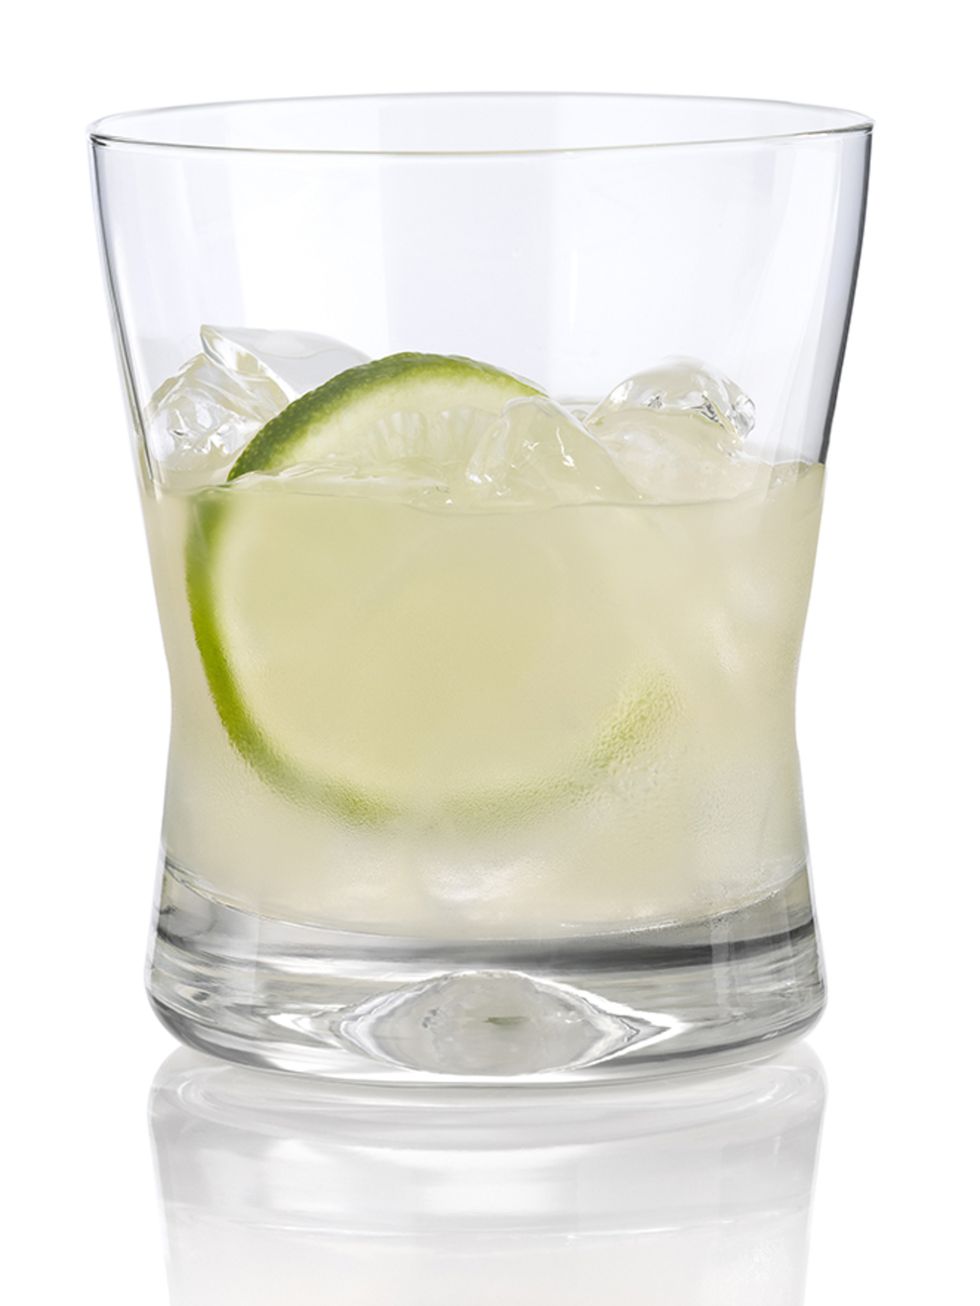 <p><strong>Where: Party / club</strong></p>

<p>Tequila on the rocks with lime</p>

<p><strong>Tequila:</strong> 100% pure agave tequila is grain and gluten free, a hidden culprit that aids hangovers. According to researchers, the type of natural sugar in